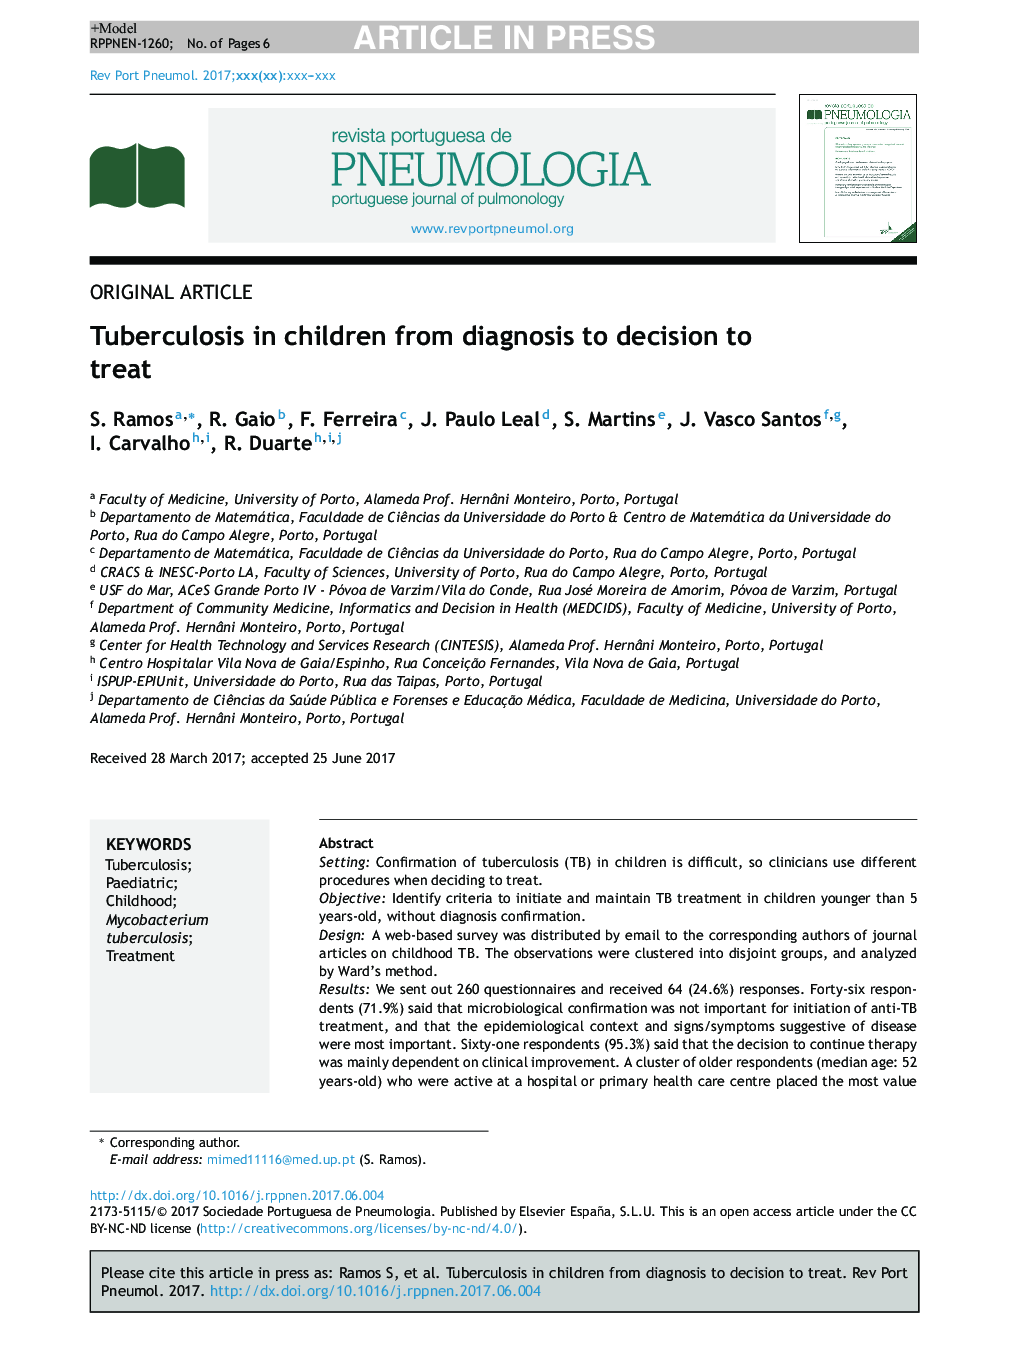 Tuberculosis in children from diagnosis to decision to treat